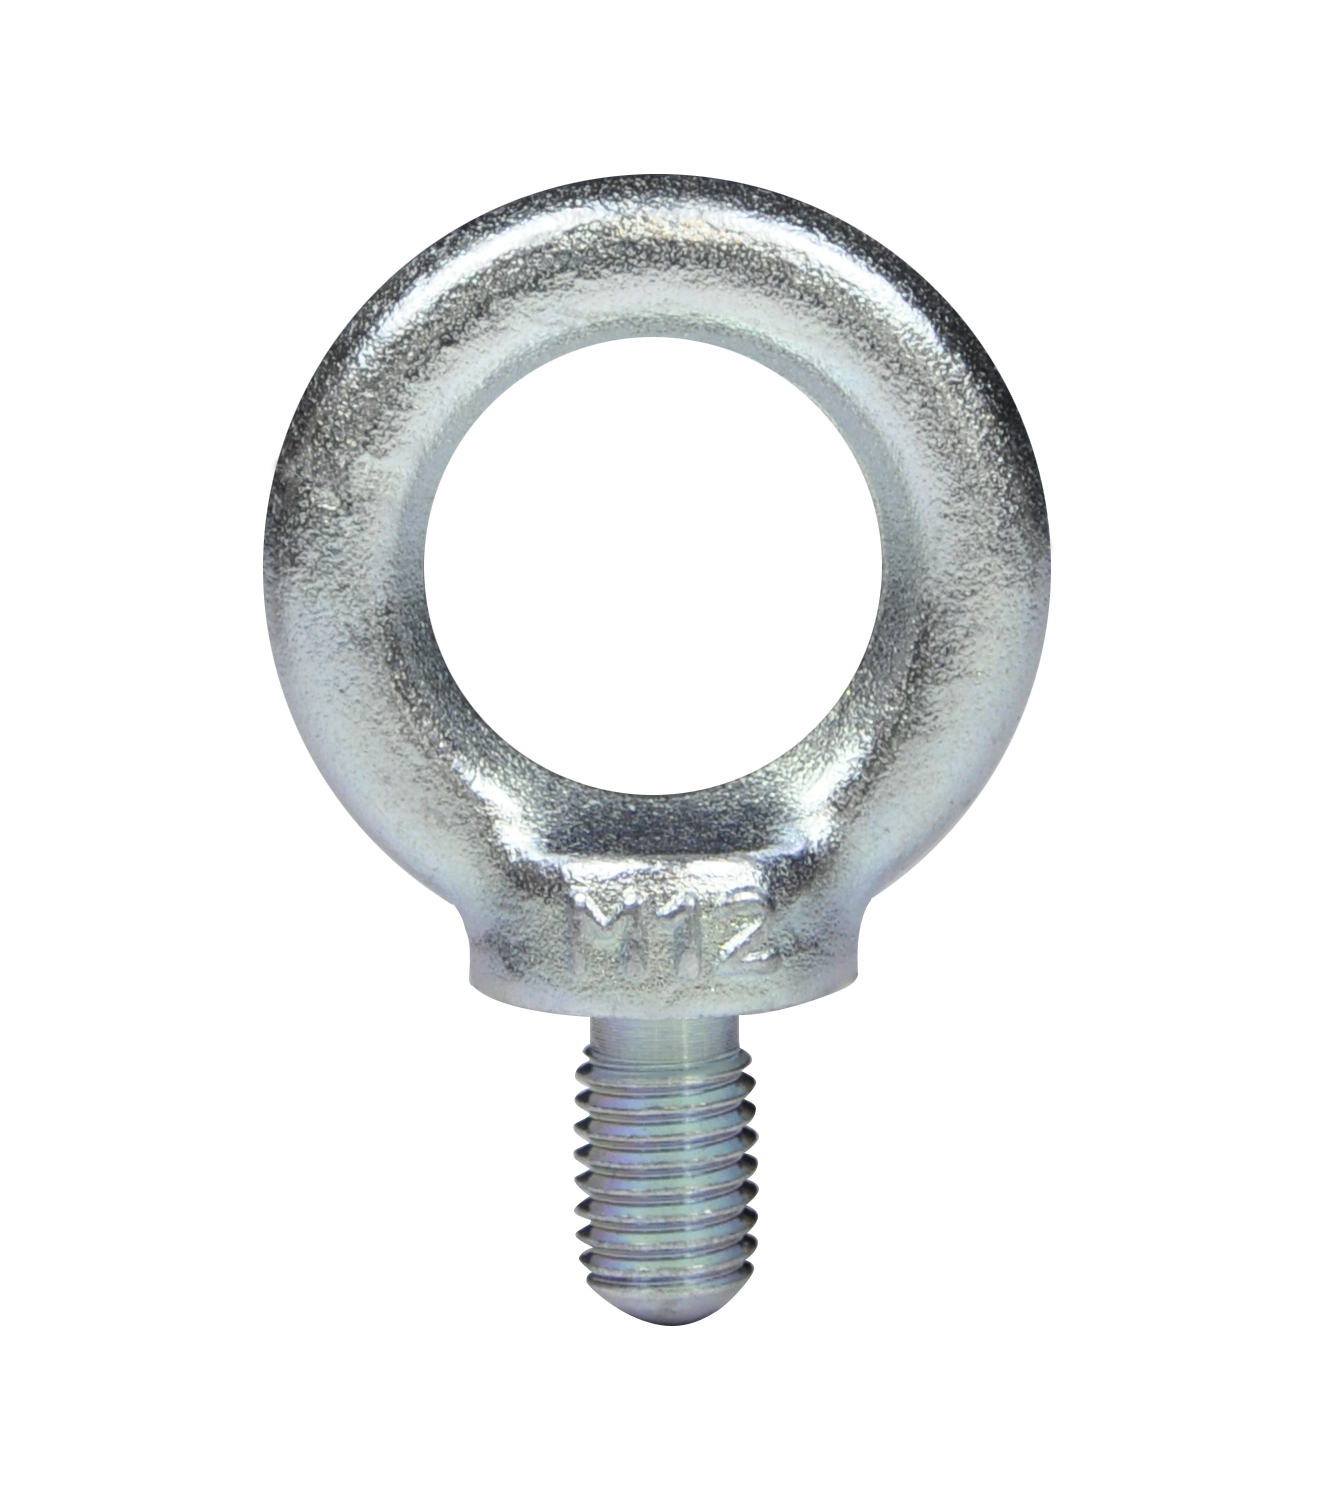 Mounting Eye Bolt to be used with EUR Drivers